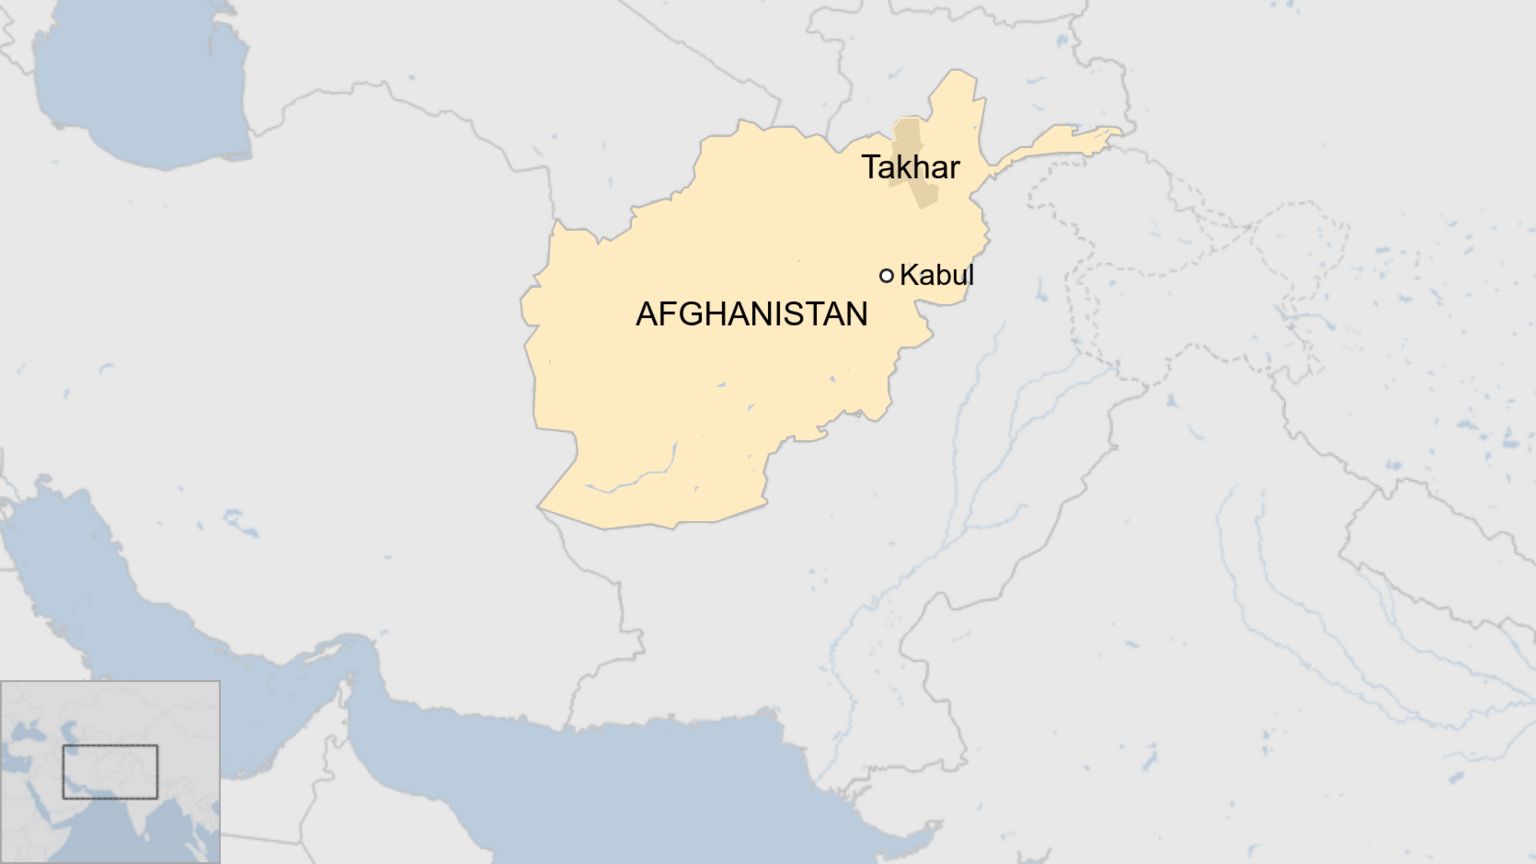 1,500 children infected with diarrhea in Afghanistan’s Takhar province